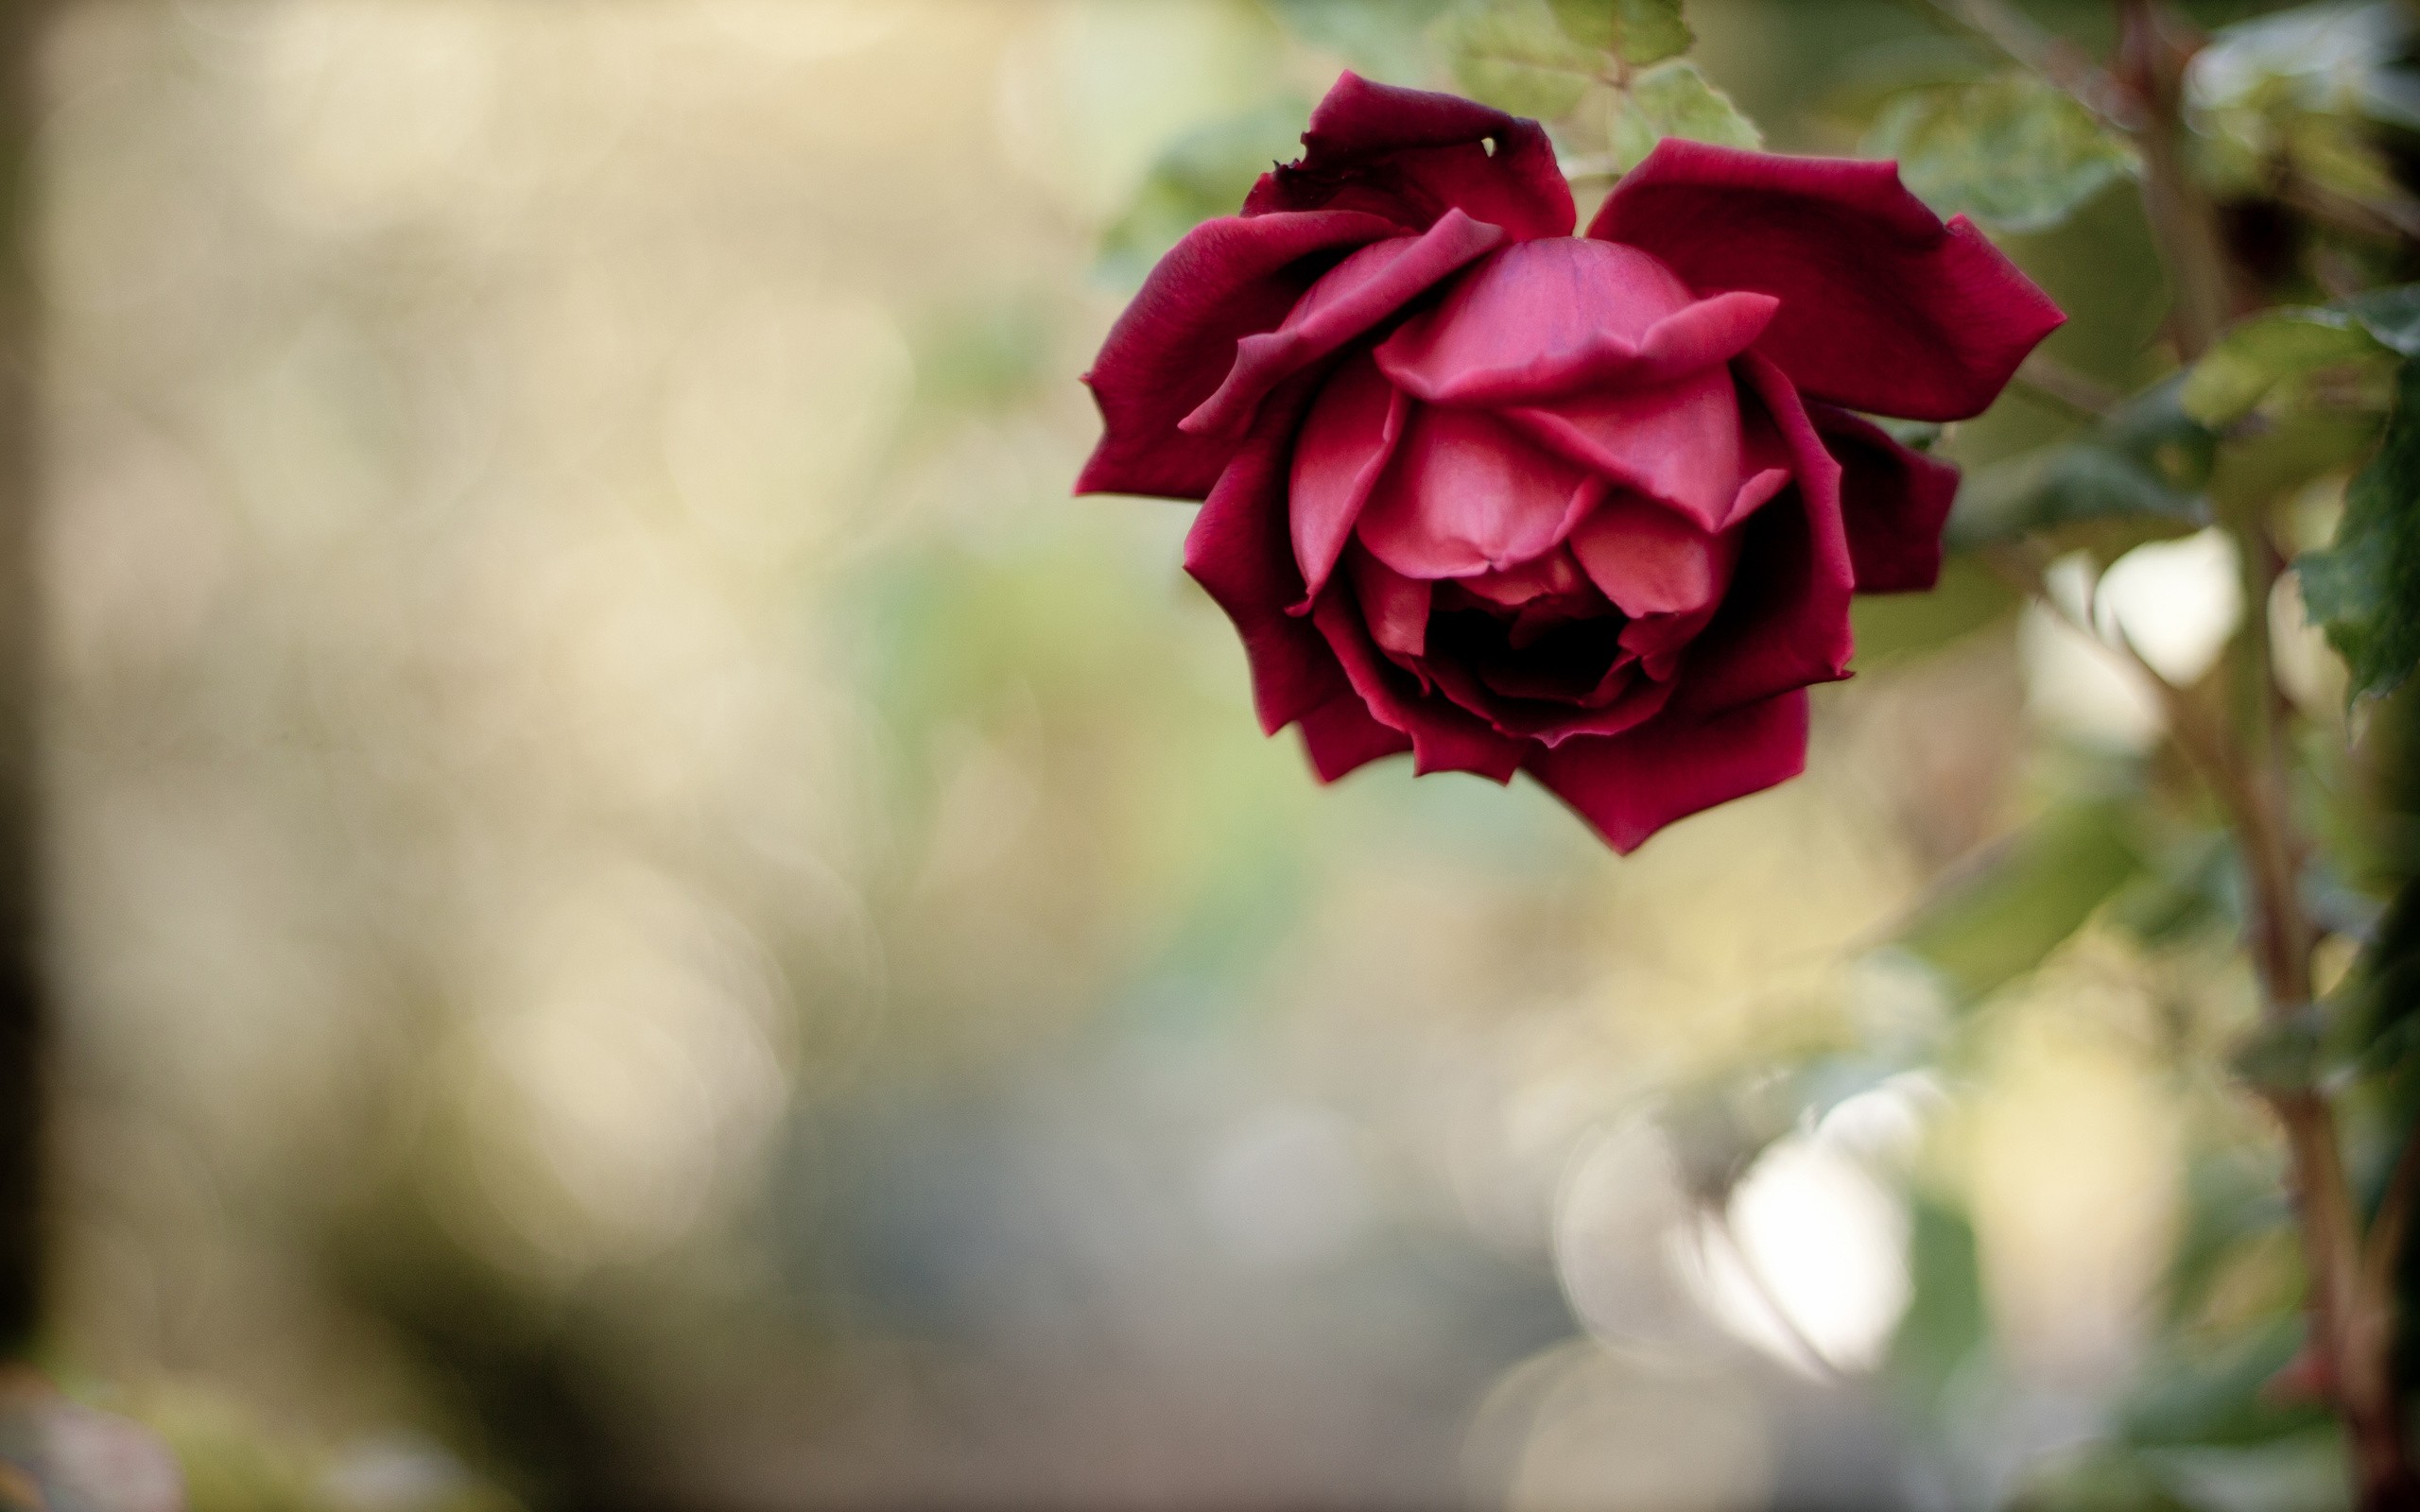 General 2560x1600 flowers rose red flowers plants